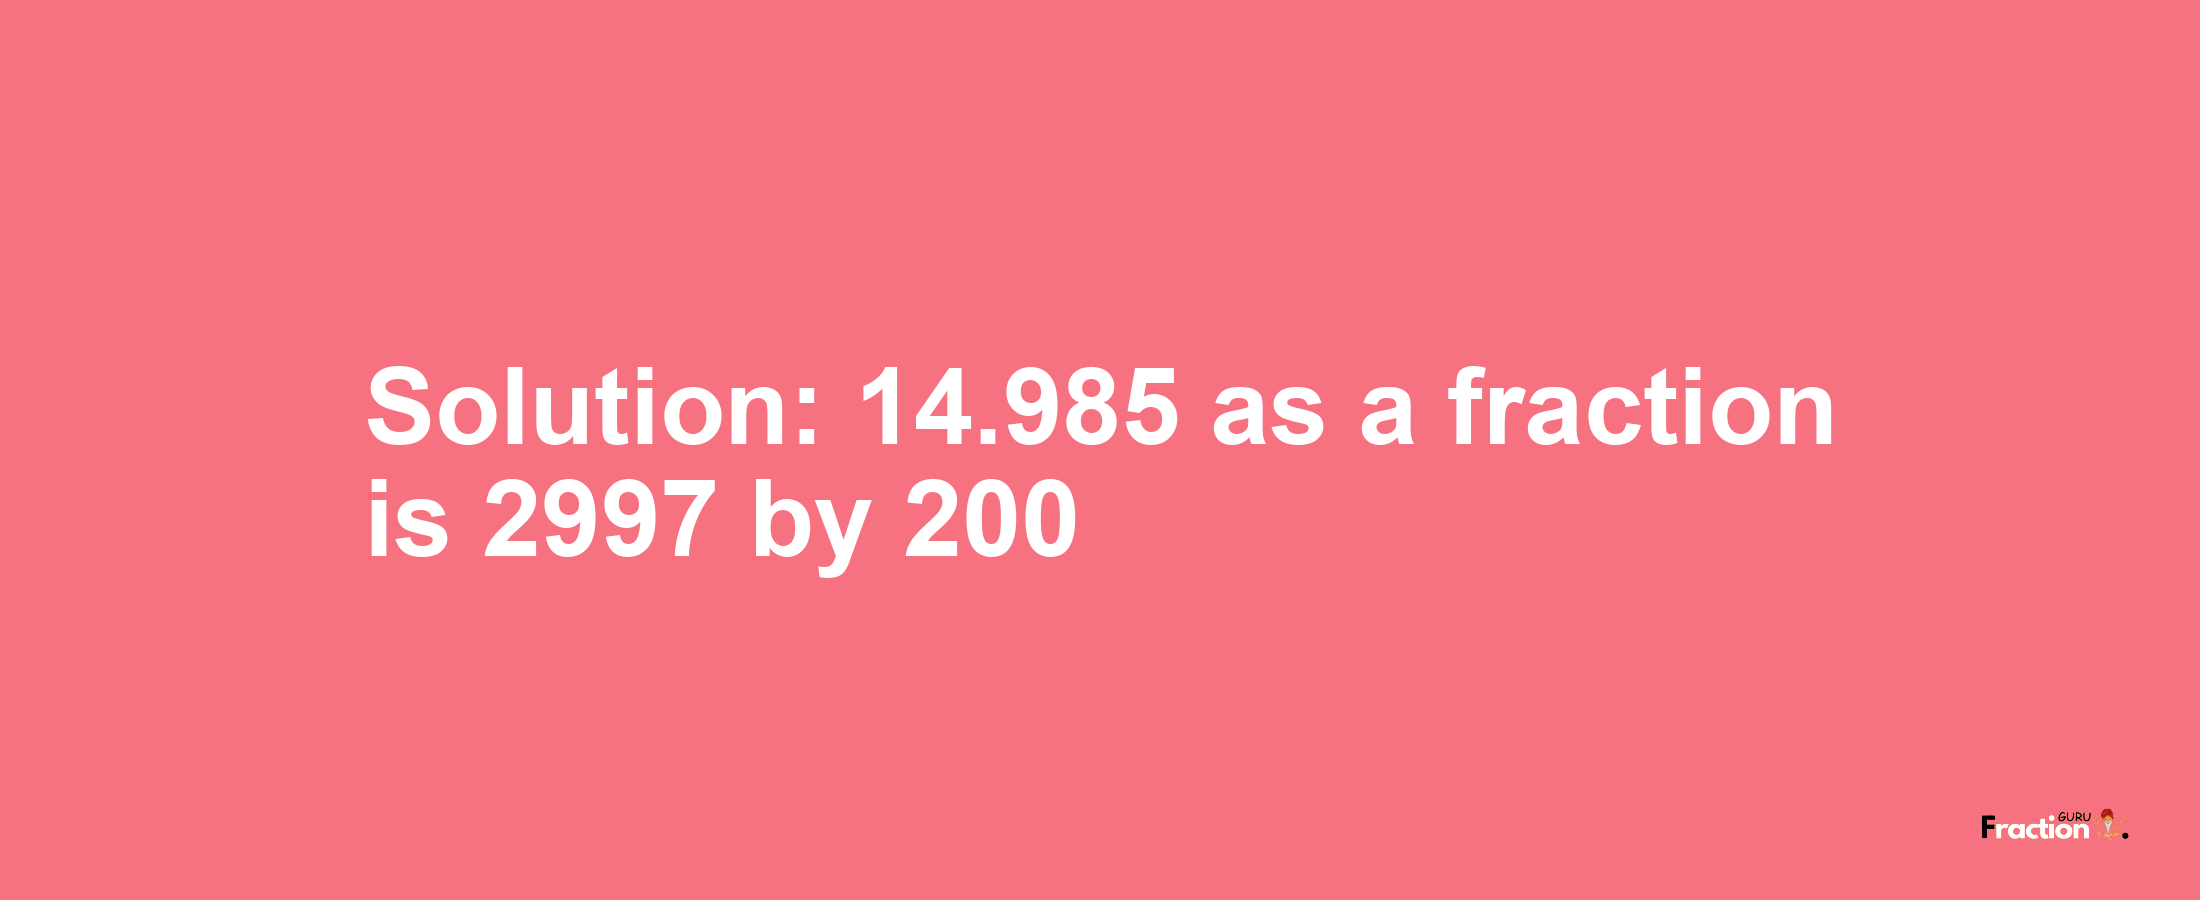 Solution:14.985 as a fraction is 2997/200